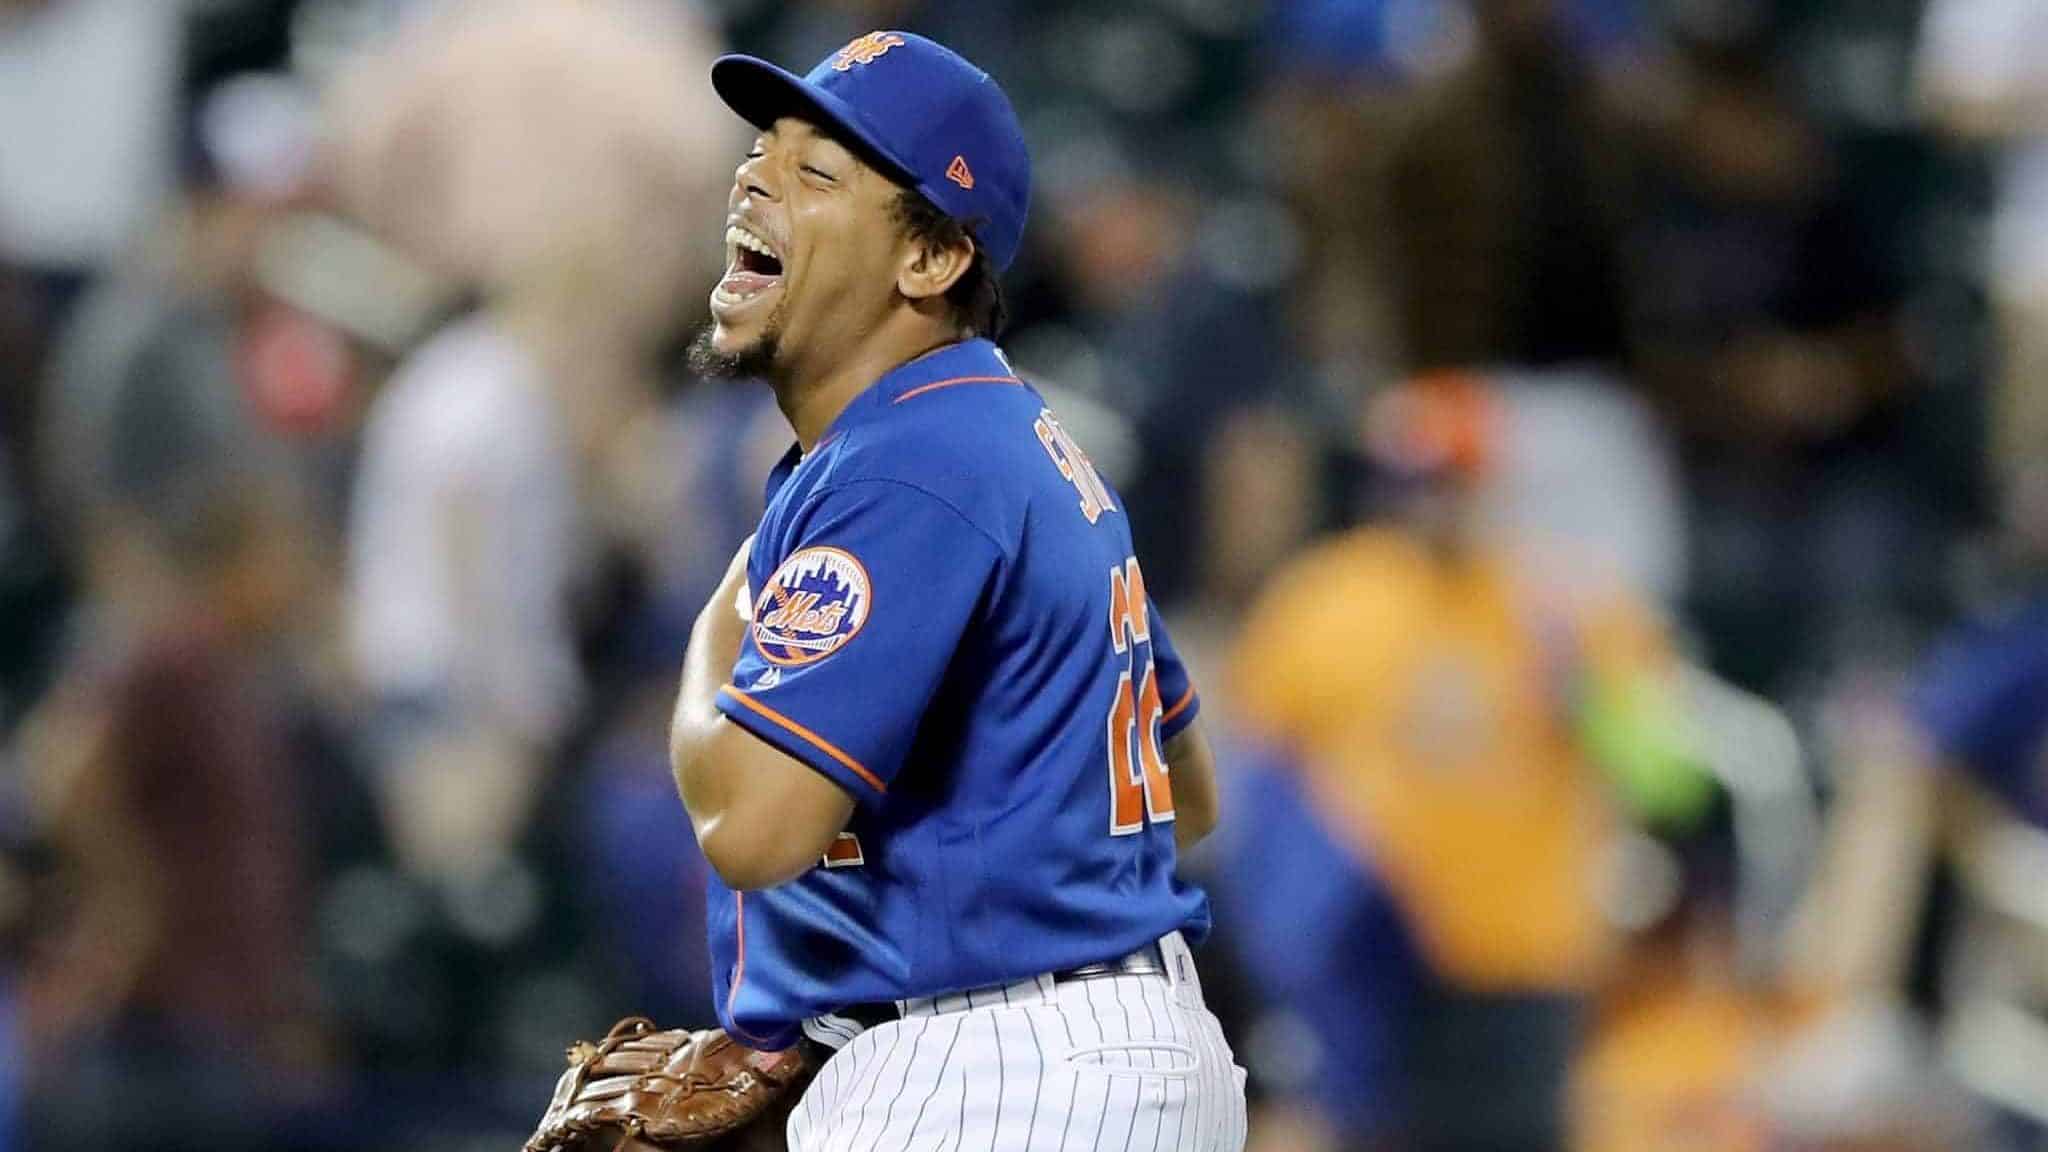 NEW YORK, NEW YORK - MAY 20: Dominic Smith #22 of the New York Mets celebrates the win over the Washington Nationals at Citi Field on May 20, 2019 in the Flushing neighborhood of the Queens borough of New York City.The New York Mets defeated the Washington Nationals 5-3.